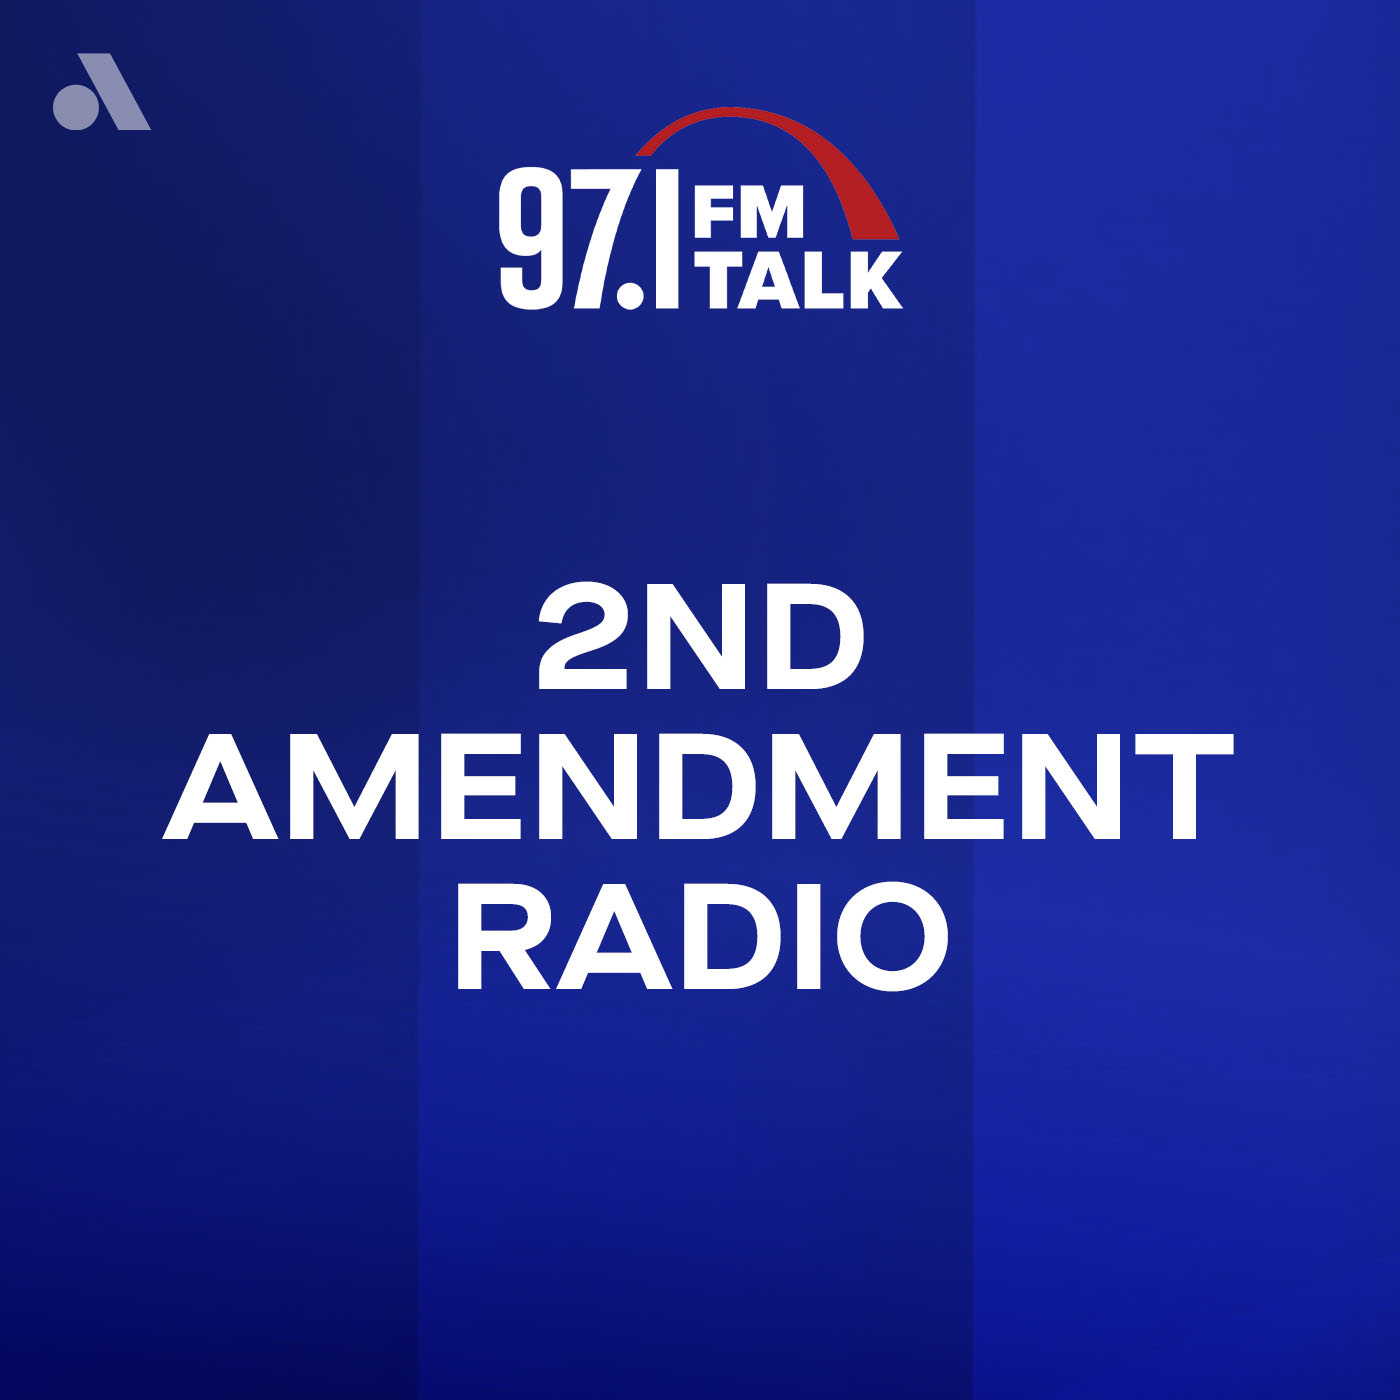 2nd Amendment Radio & The Great Outdoors 3-20-21 podcast